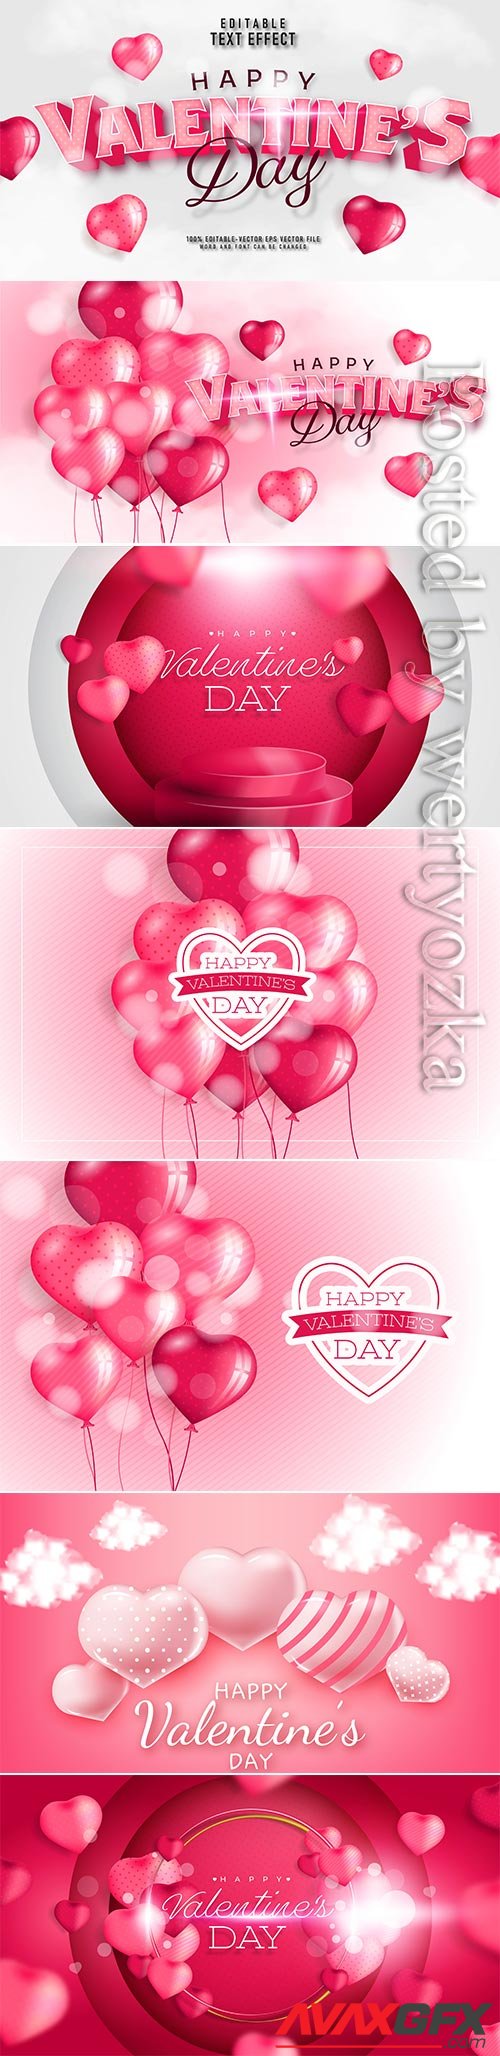 Valentine's day text effect in vector